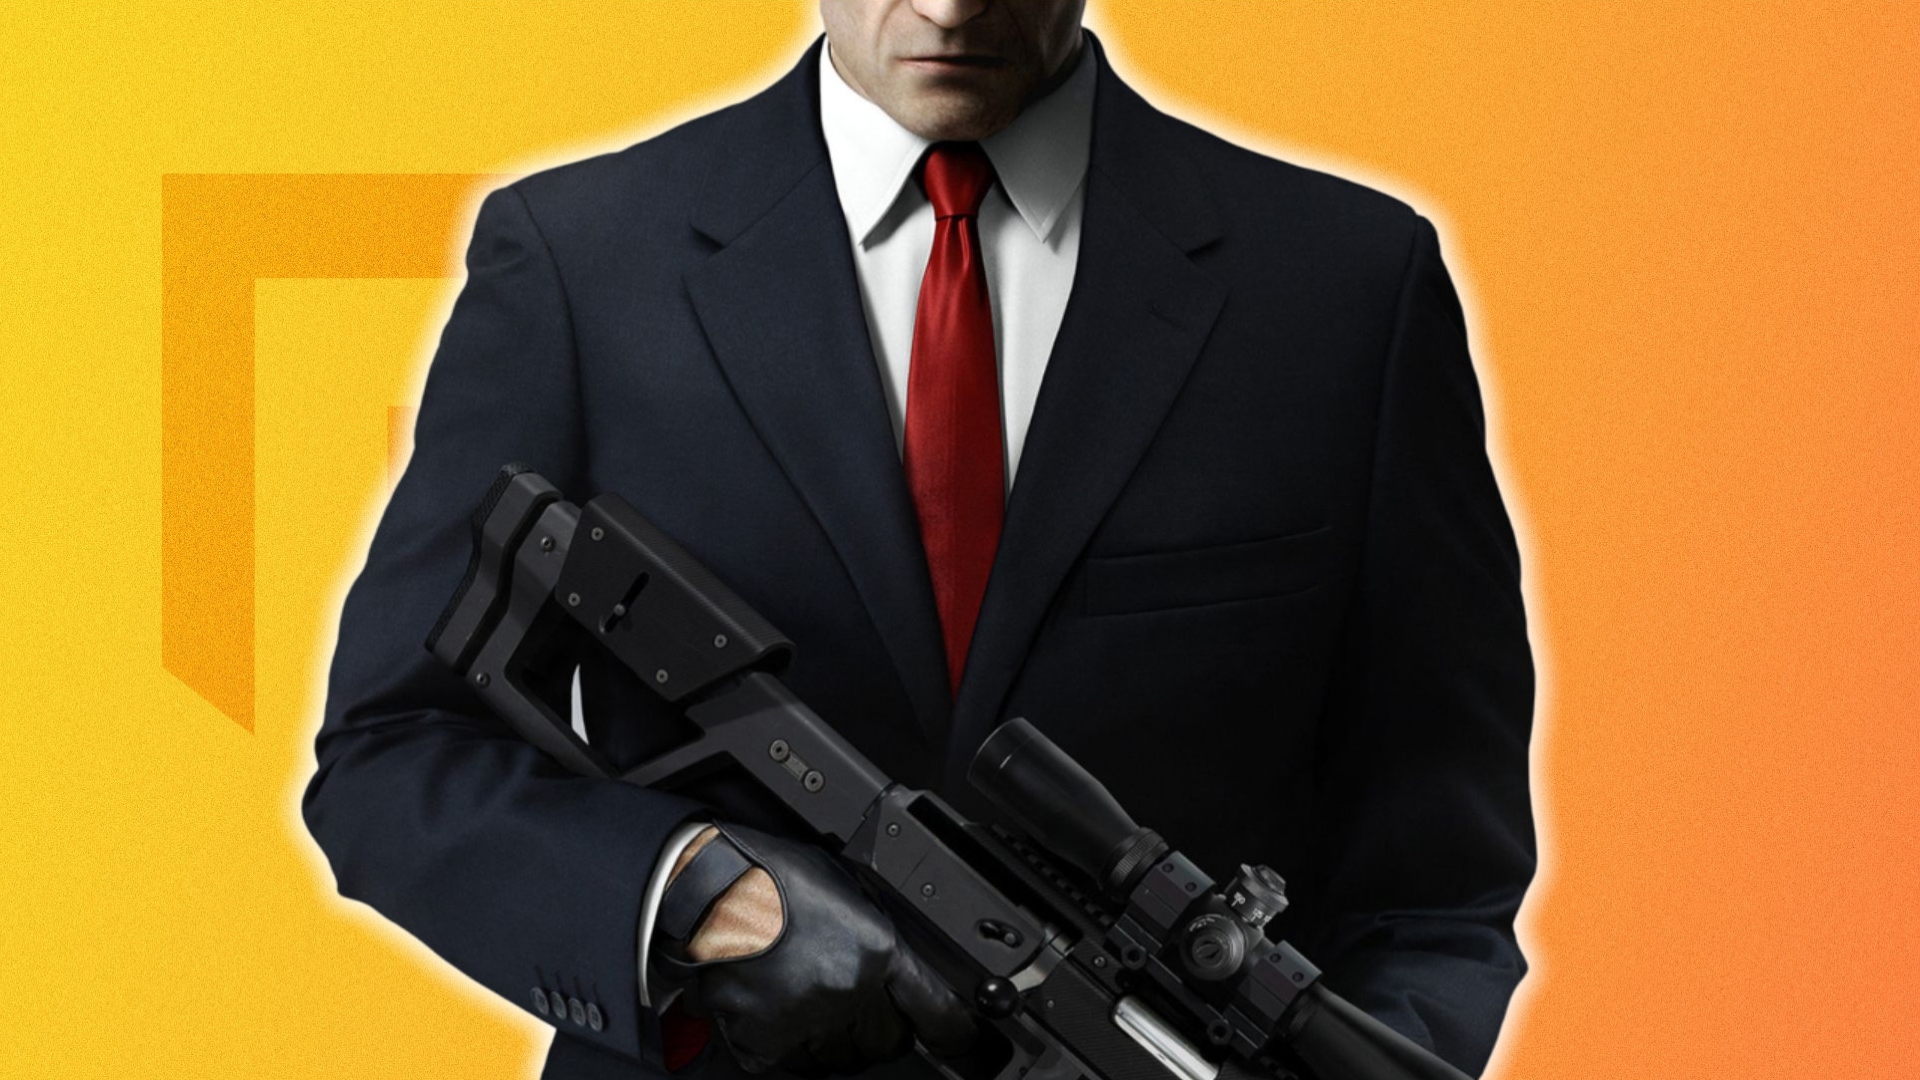 Hitman 3 Mobile - How to play on an Android or iOS phone? - Games Manuals